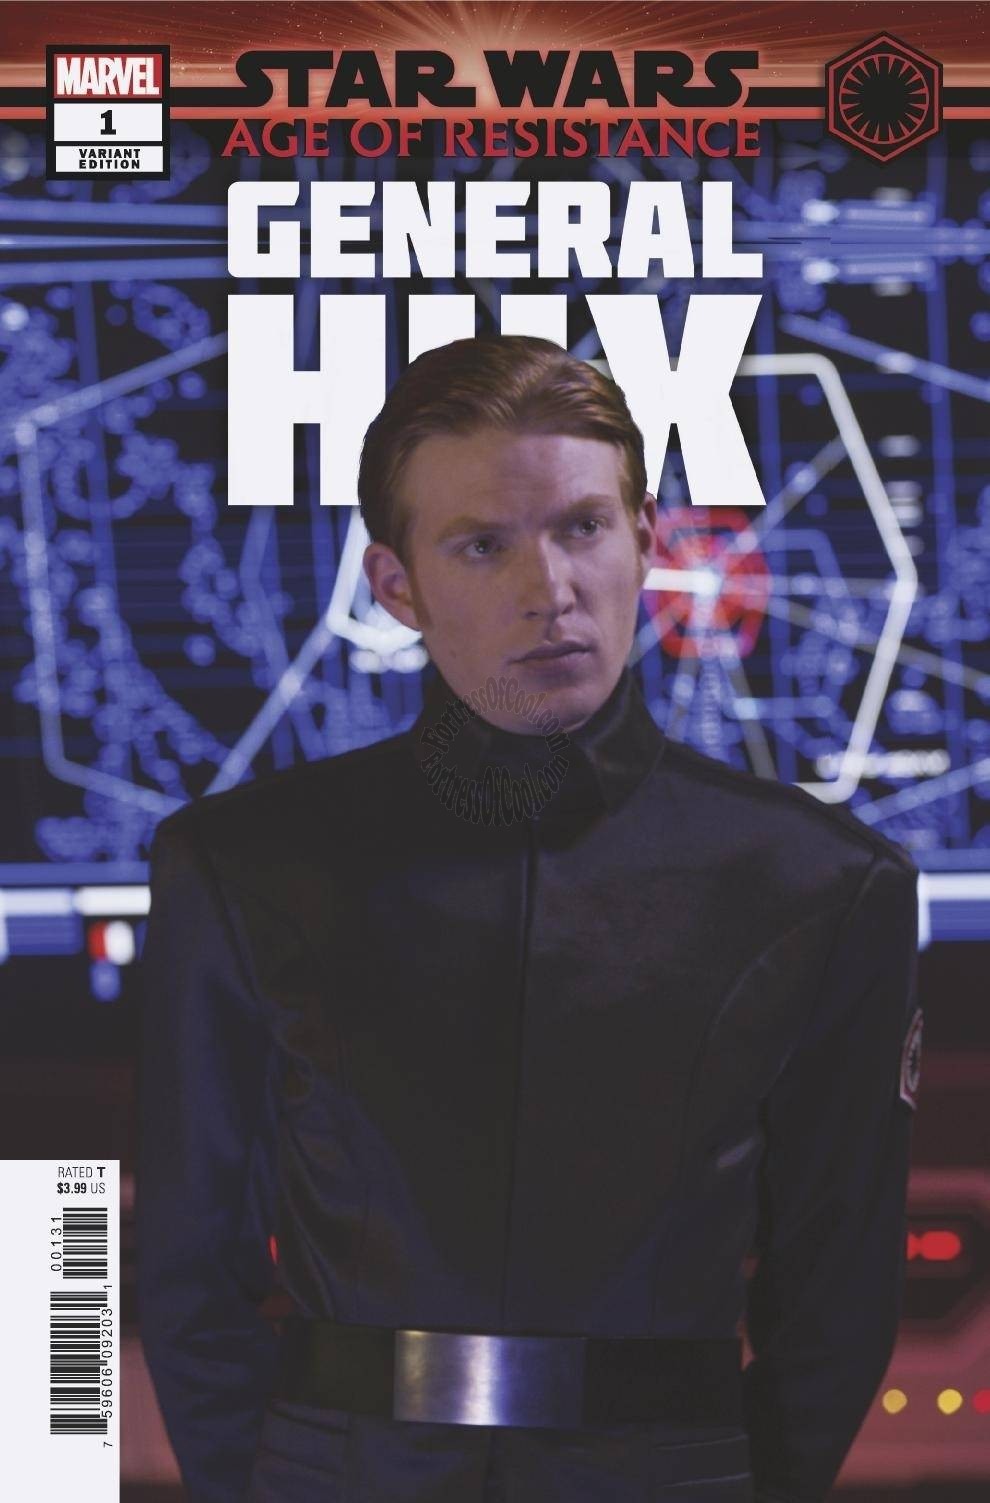 STAR WARS AGE OF REPUBLIC GENERAL HUX #1 1:10 MOVIE VARIANT